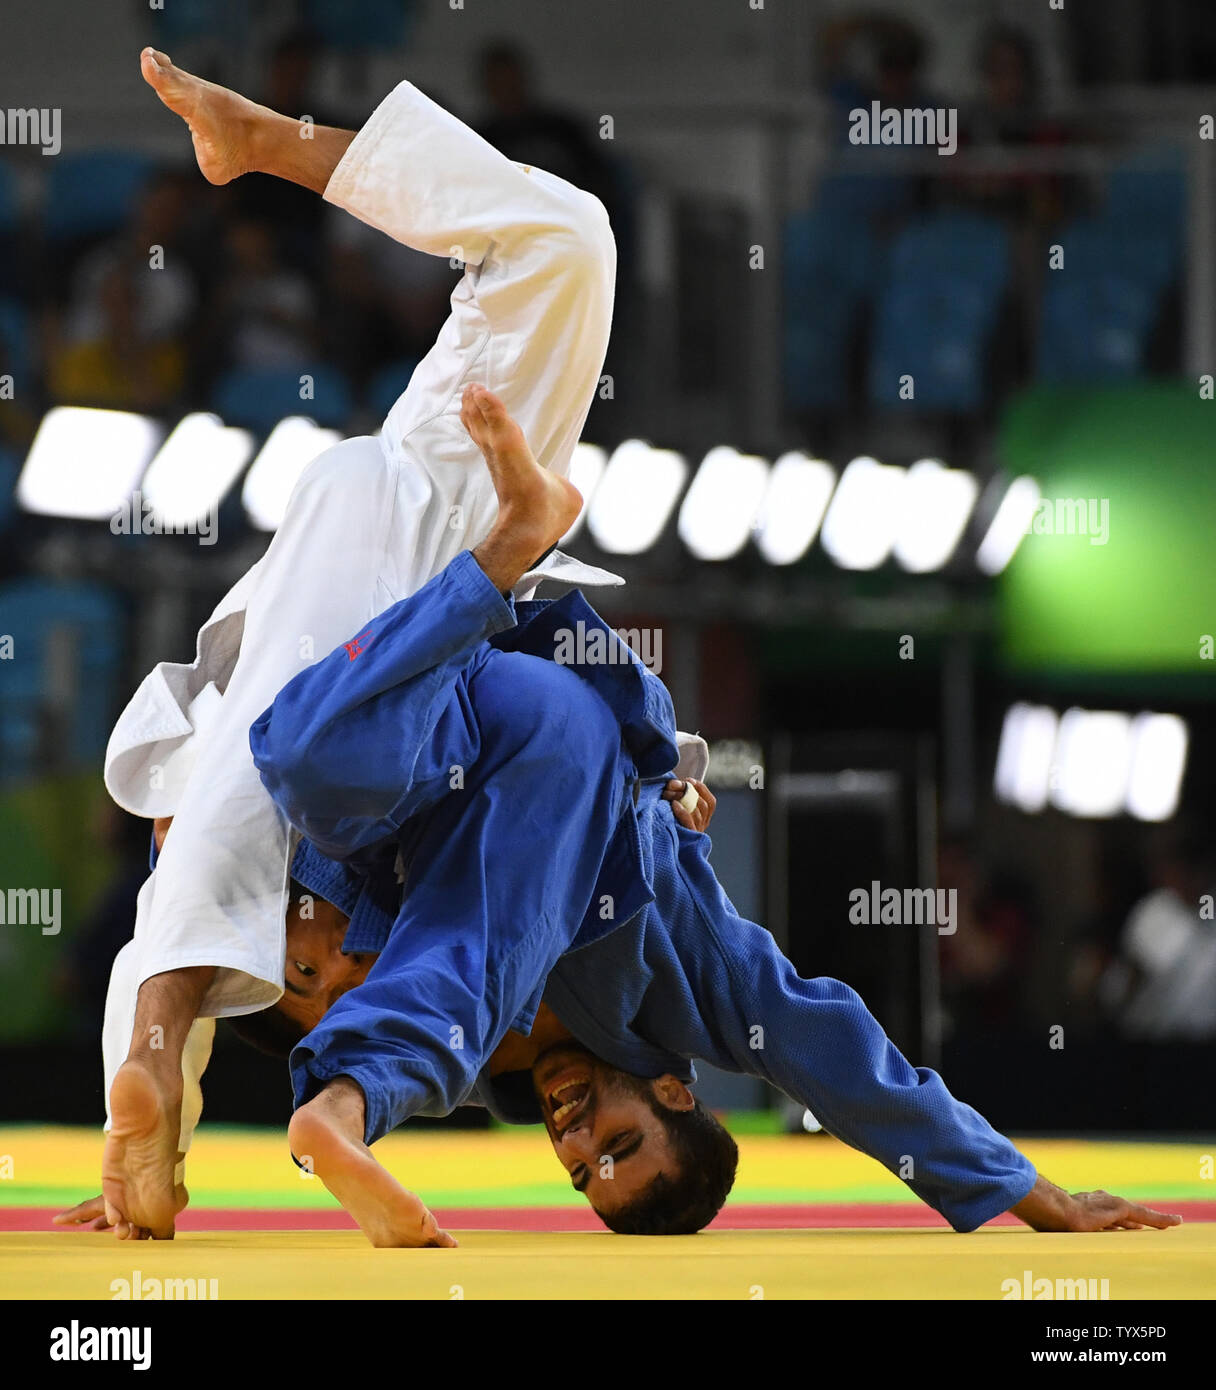 Antoine Bouchard of Canada puts his head to the mat fighting with Tumurkhuleg Davaadorj of Mongolia in 66KG Judo at the 2016 Rio Summer Olympics in Rio de Janeiro, Brazil, on August 7, 2016. Bouchard won the match.  Photo by Terry Schmitt/UPI Stock Photo